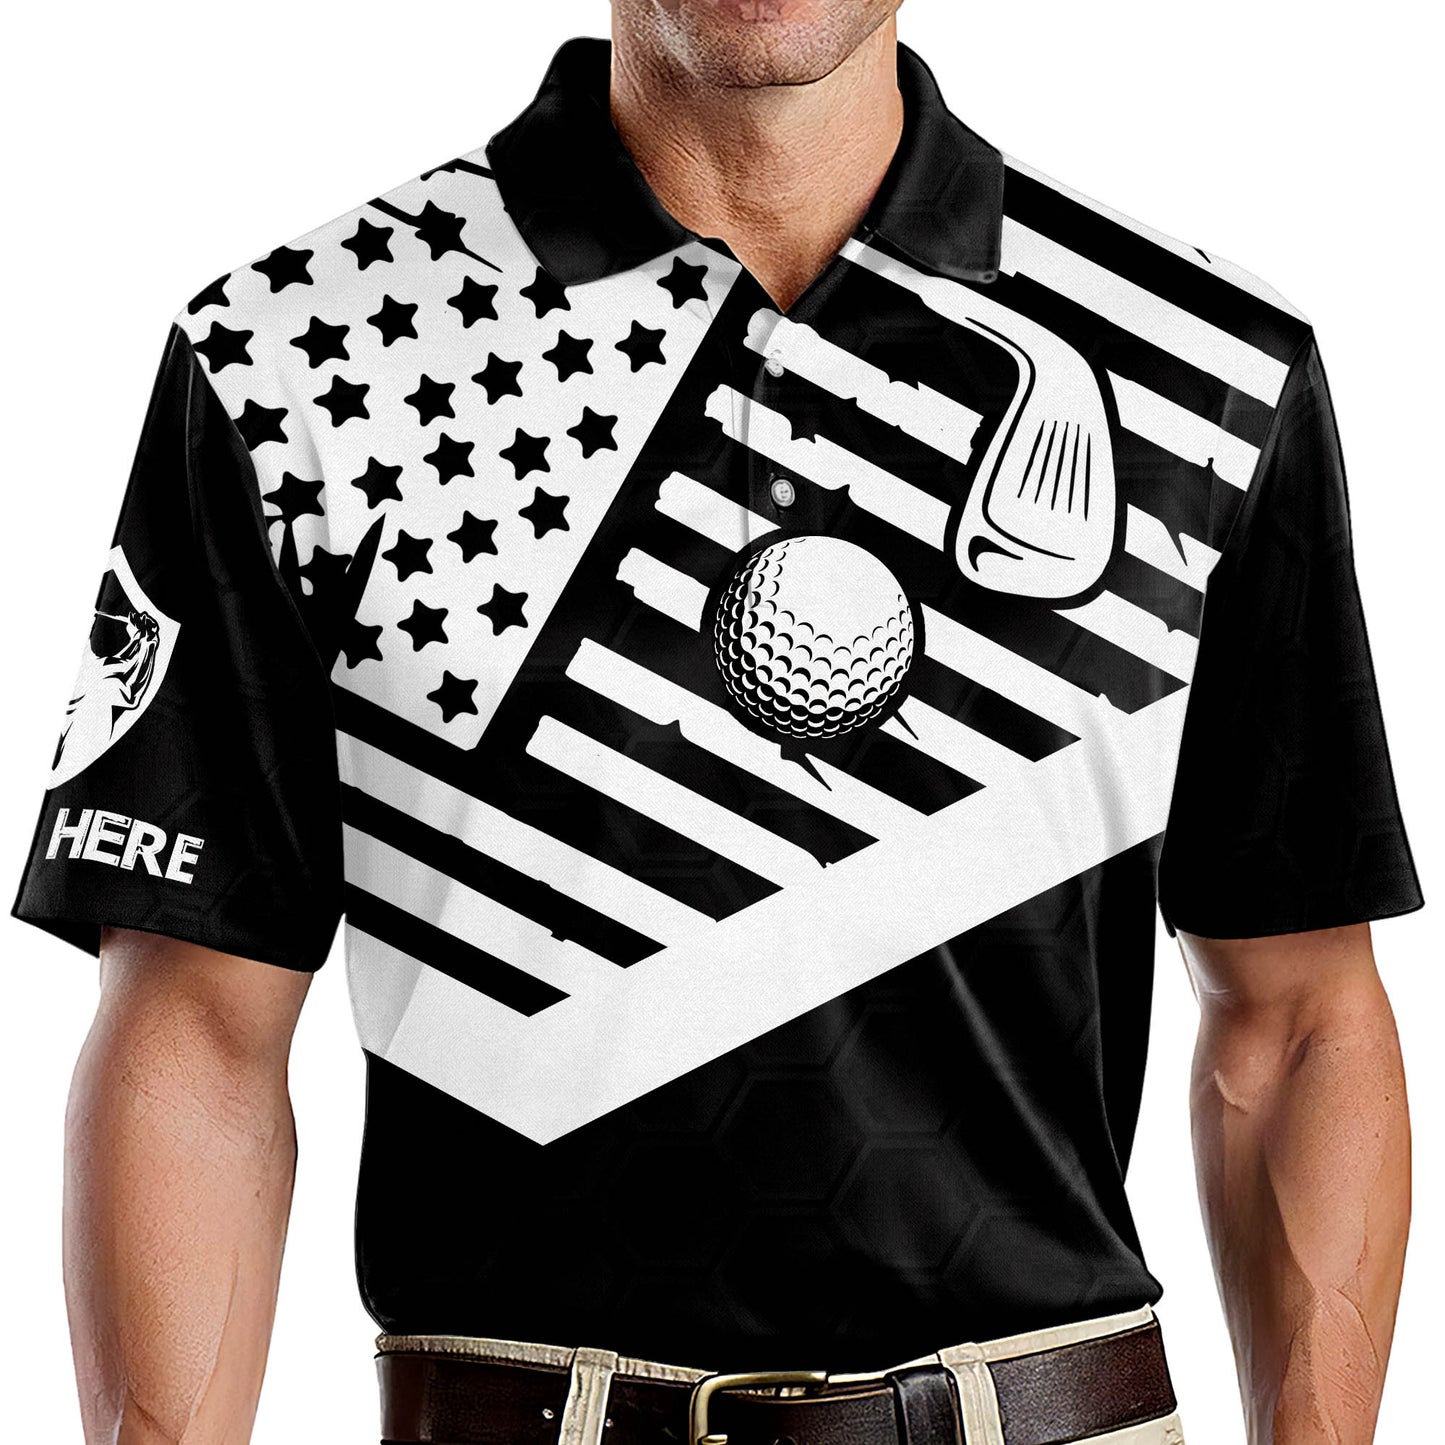 Not All Men Are Created Eagle Golf Polo Shirt GM0129